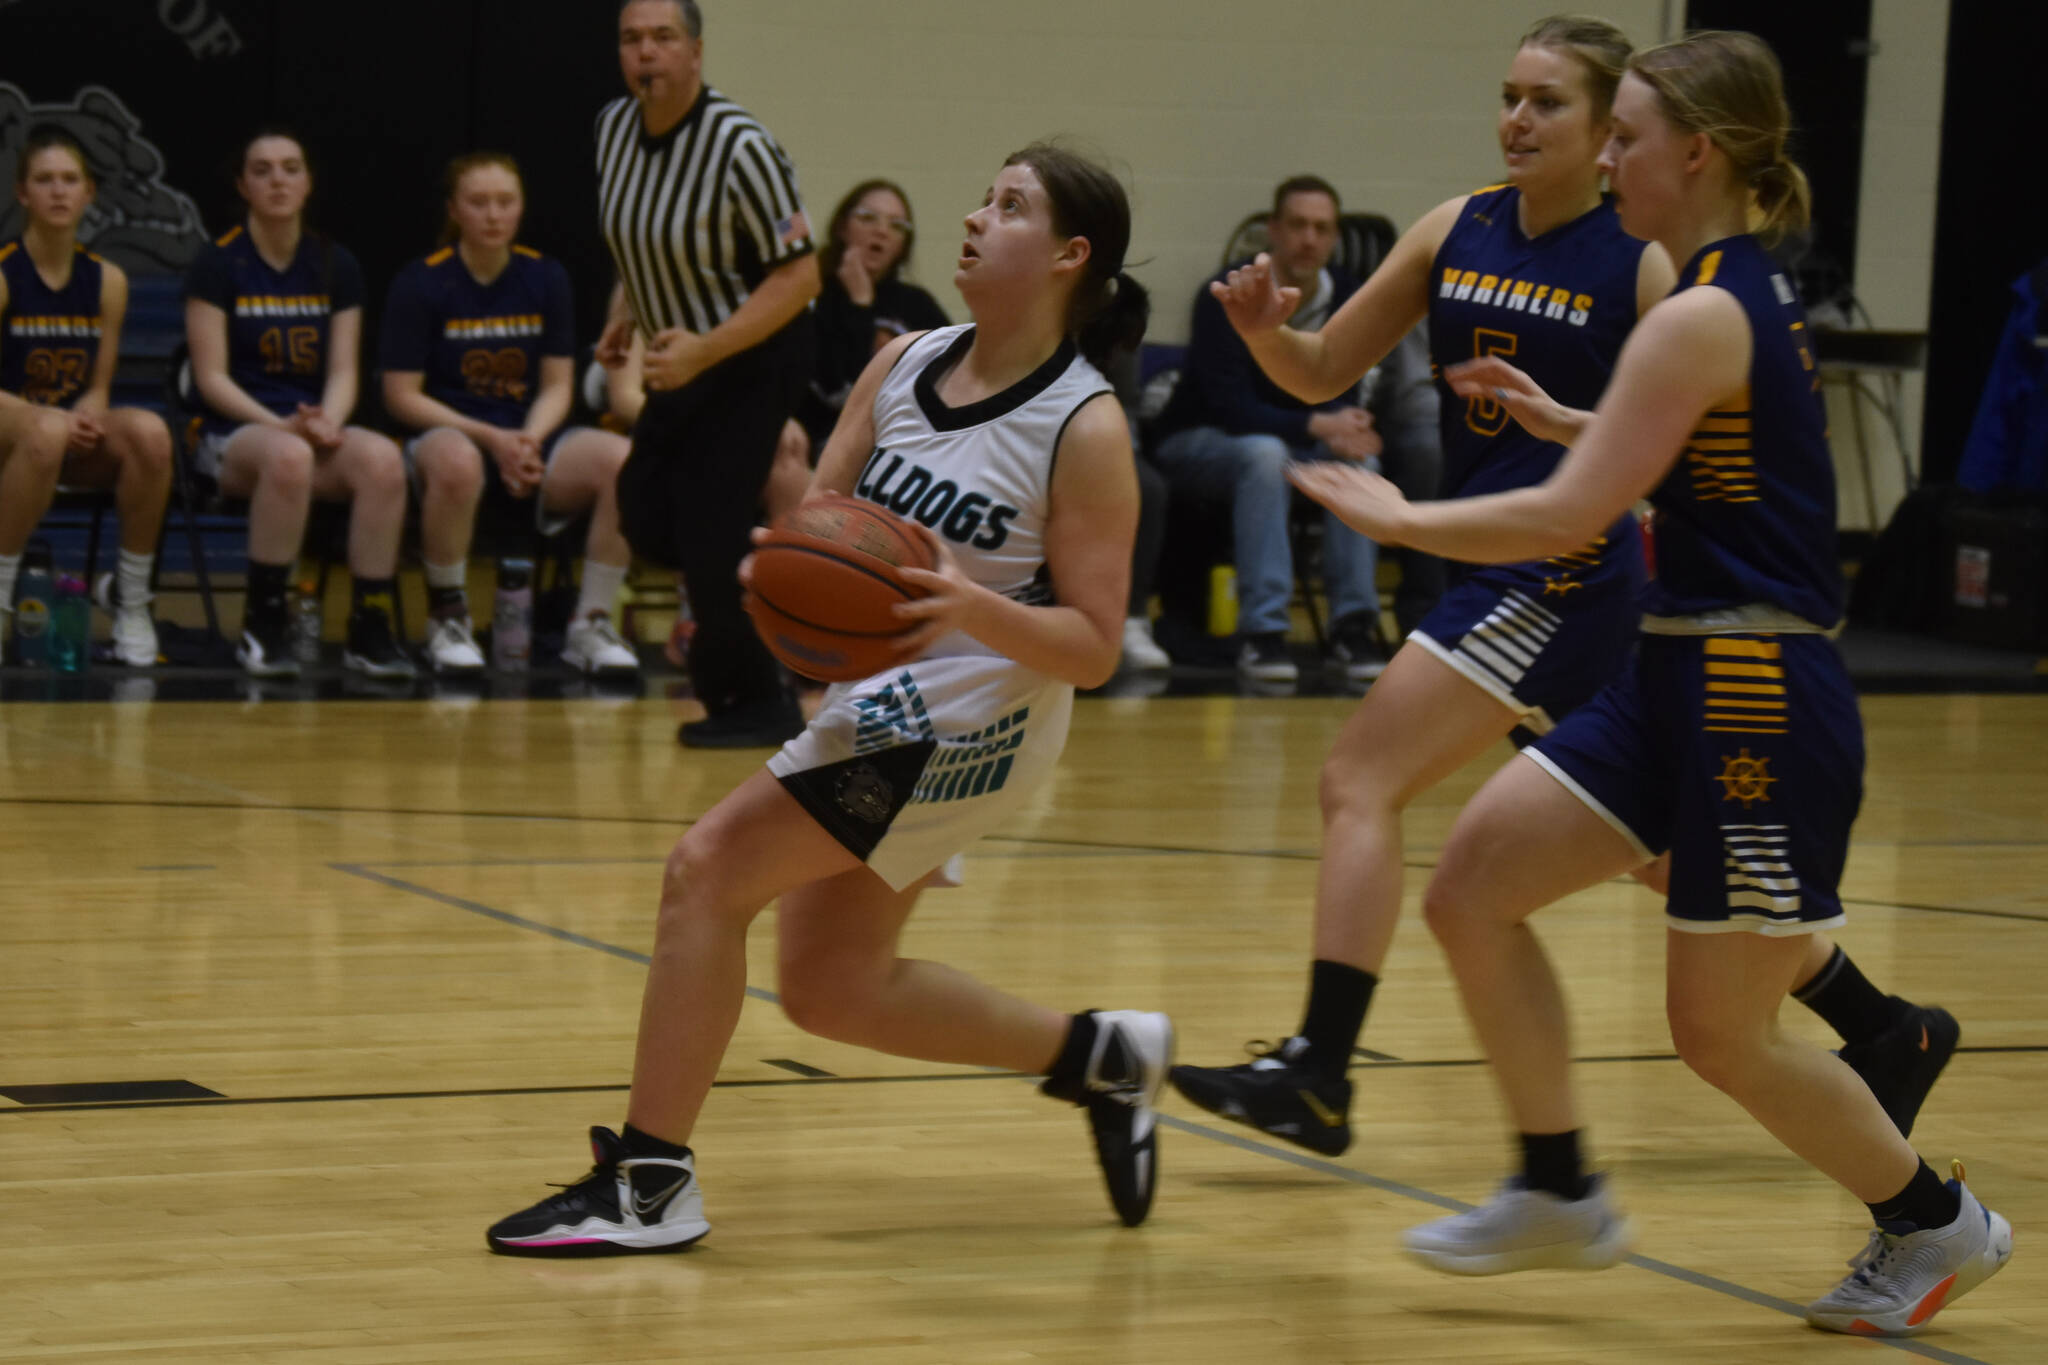 Nikiski's Ember Nelson looks to shoot, closely pursued by Homer's Minadora Reutov and Hannah Stonorov during a basketball game on Tuesday Feb. 21, 2023, at Nikiski Middle/High School in Nikiski, Alaska. (Jake Dye/Peninsula Clarion)